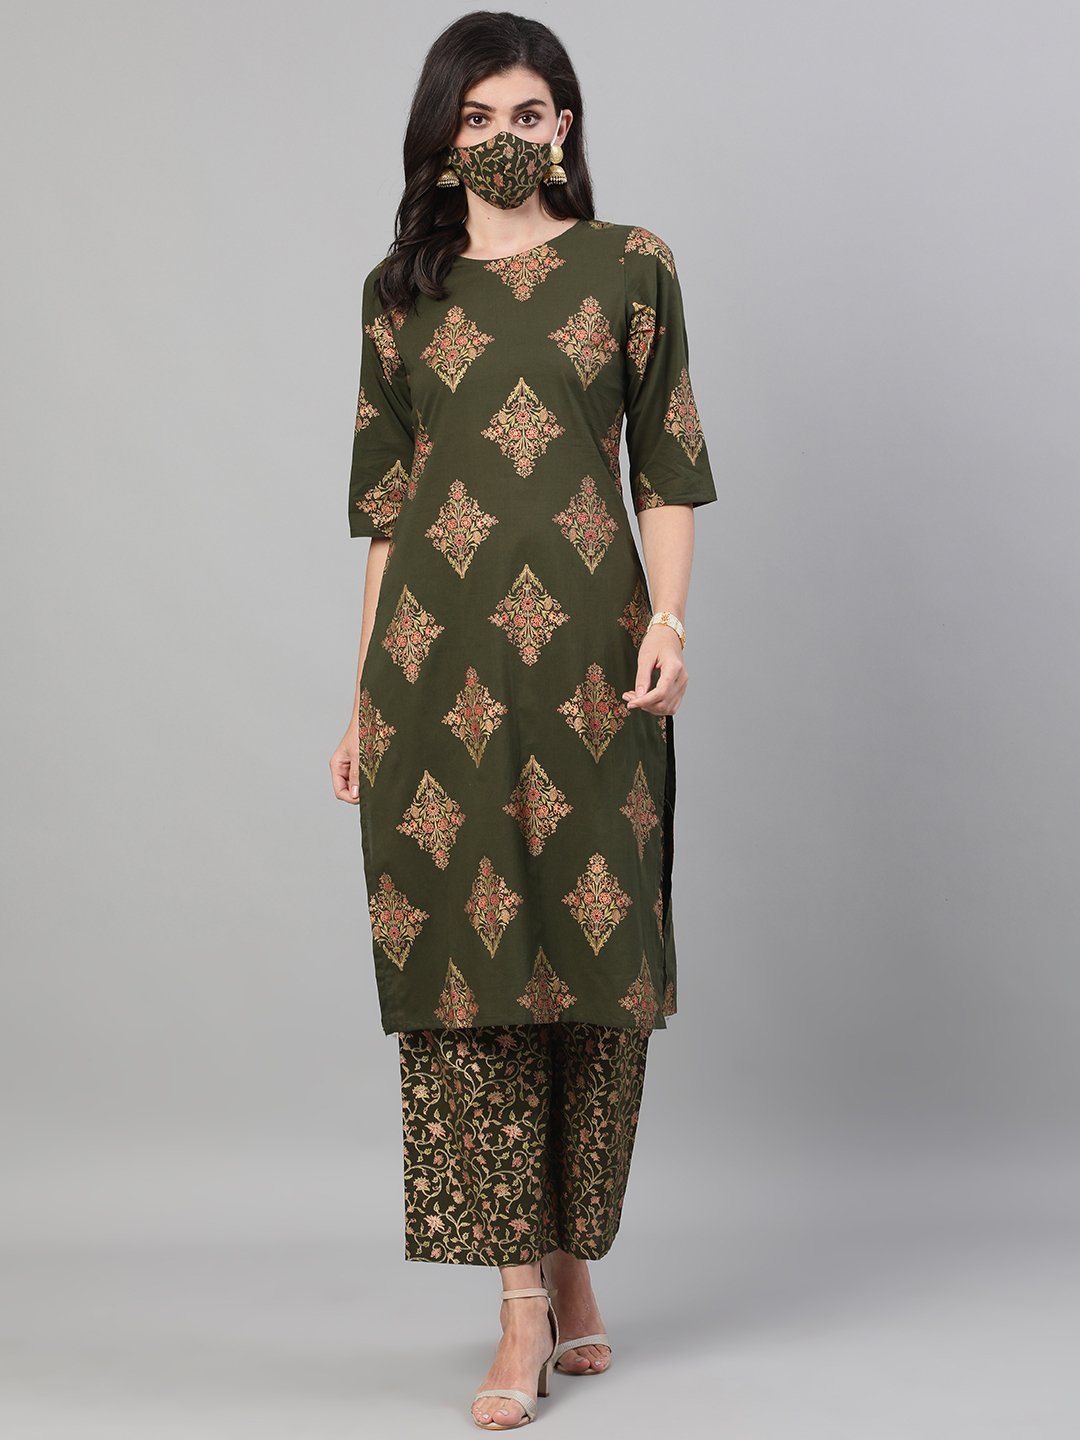 Women's Mehendi Green And Pink Gold Printed Three-Quarter Sleeves Straight Kurta With Palazzo With Pockets And Face Mask - Nayo Clothing